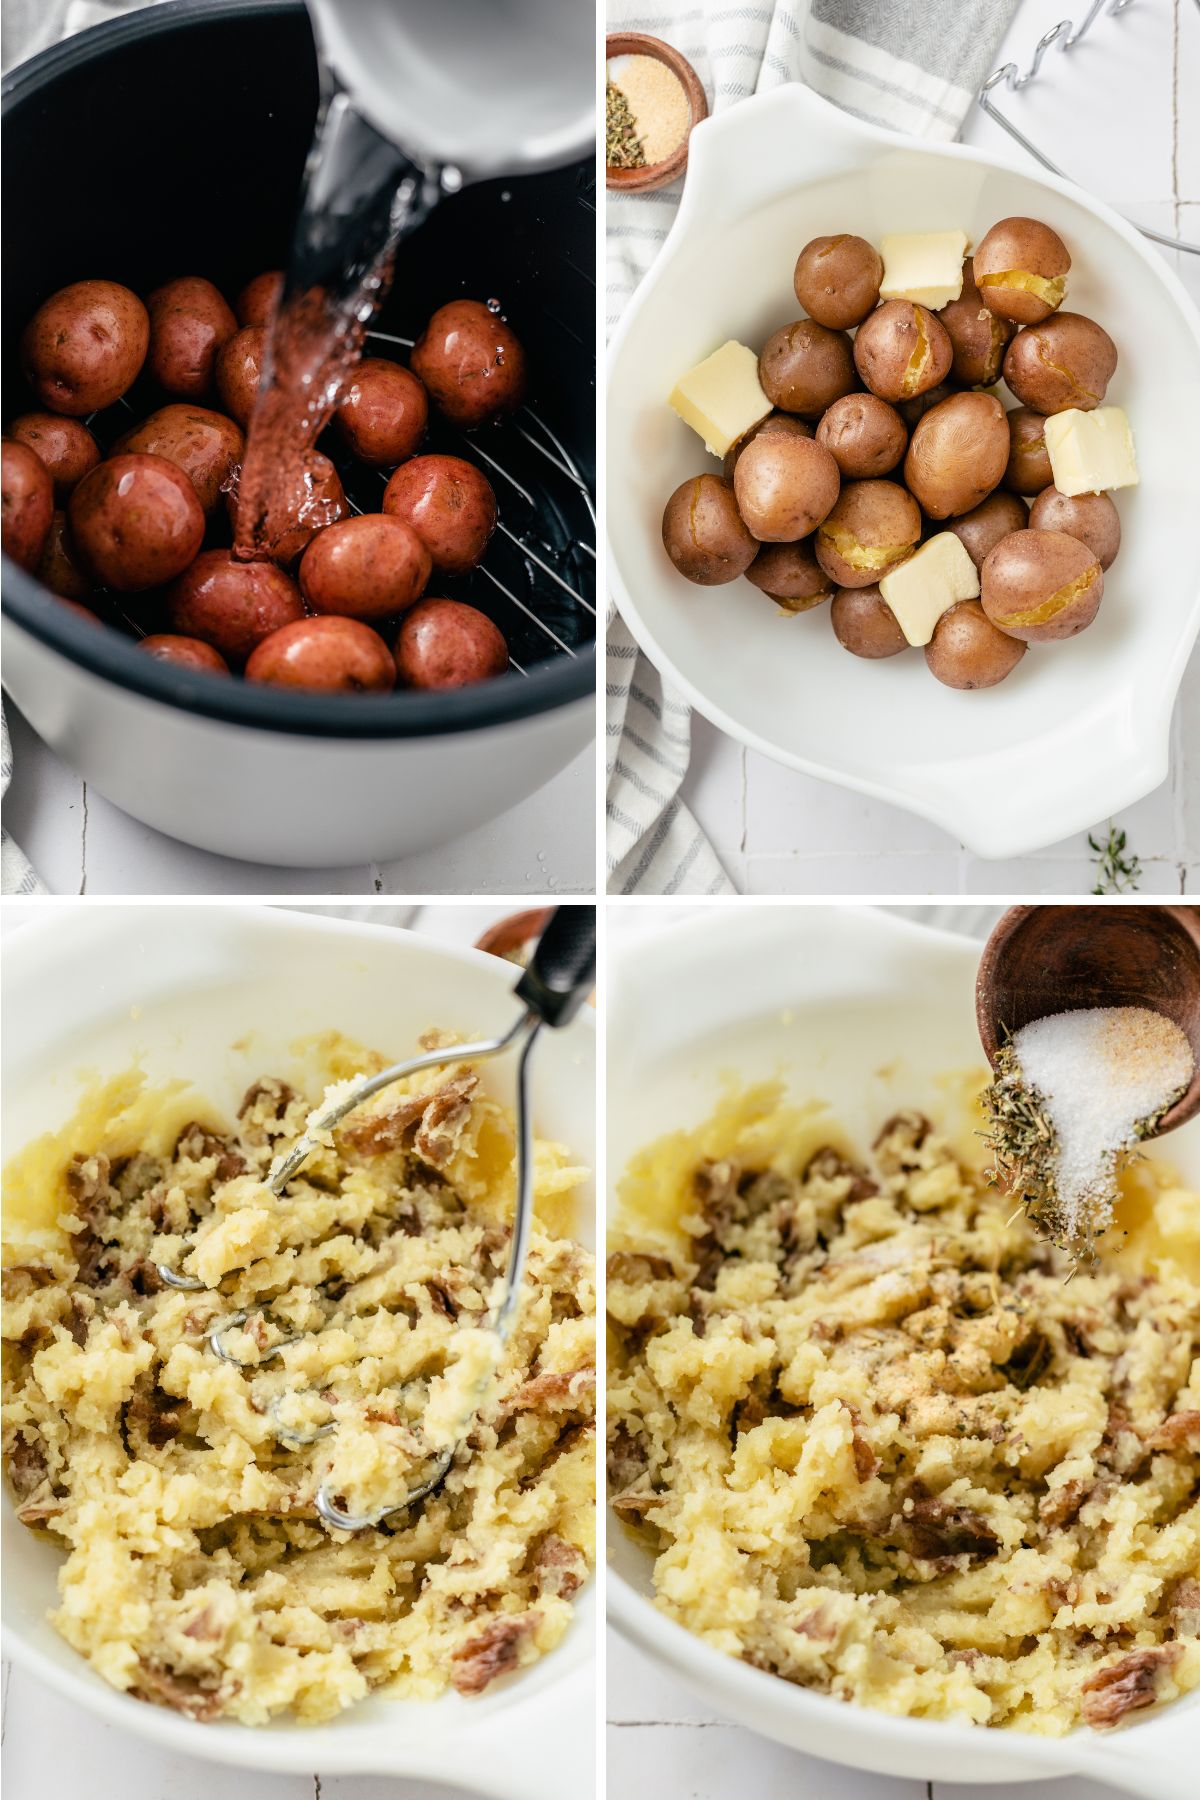 step-by-step instructions for how to make Mashed Potatoes with Red Skin by first boiling the potatoes in an Instant Pot